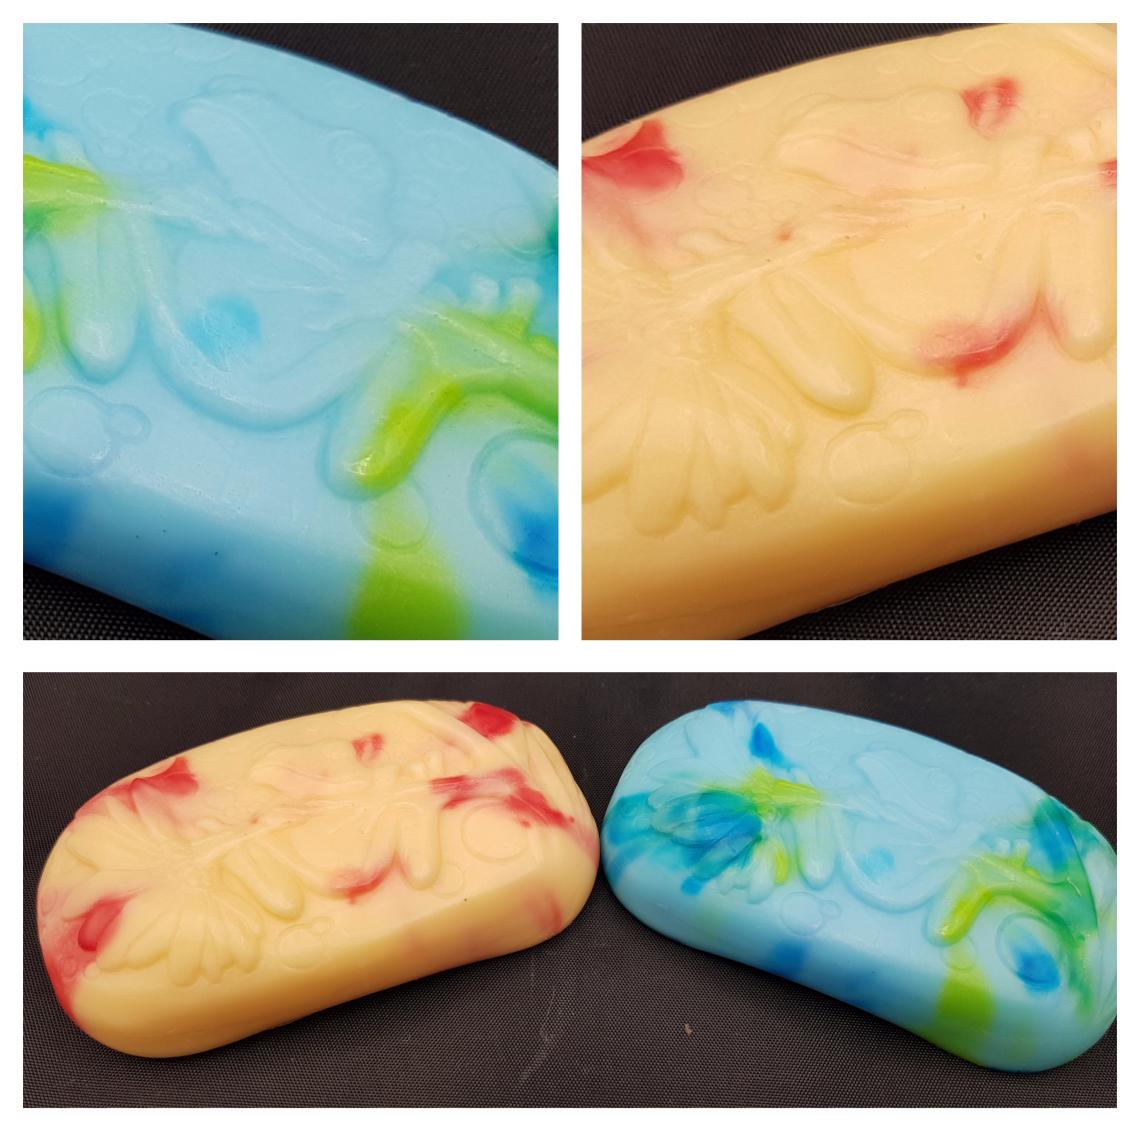 Two frog soaps in blues and oranges.